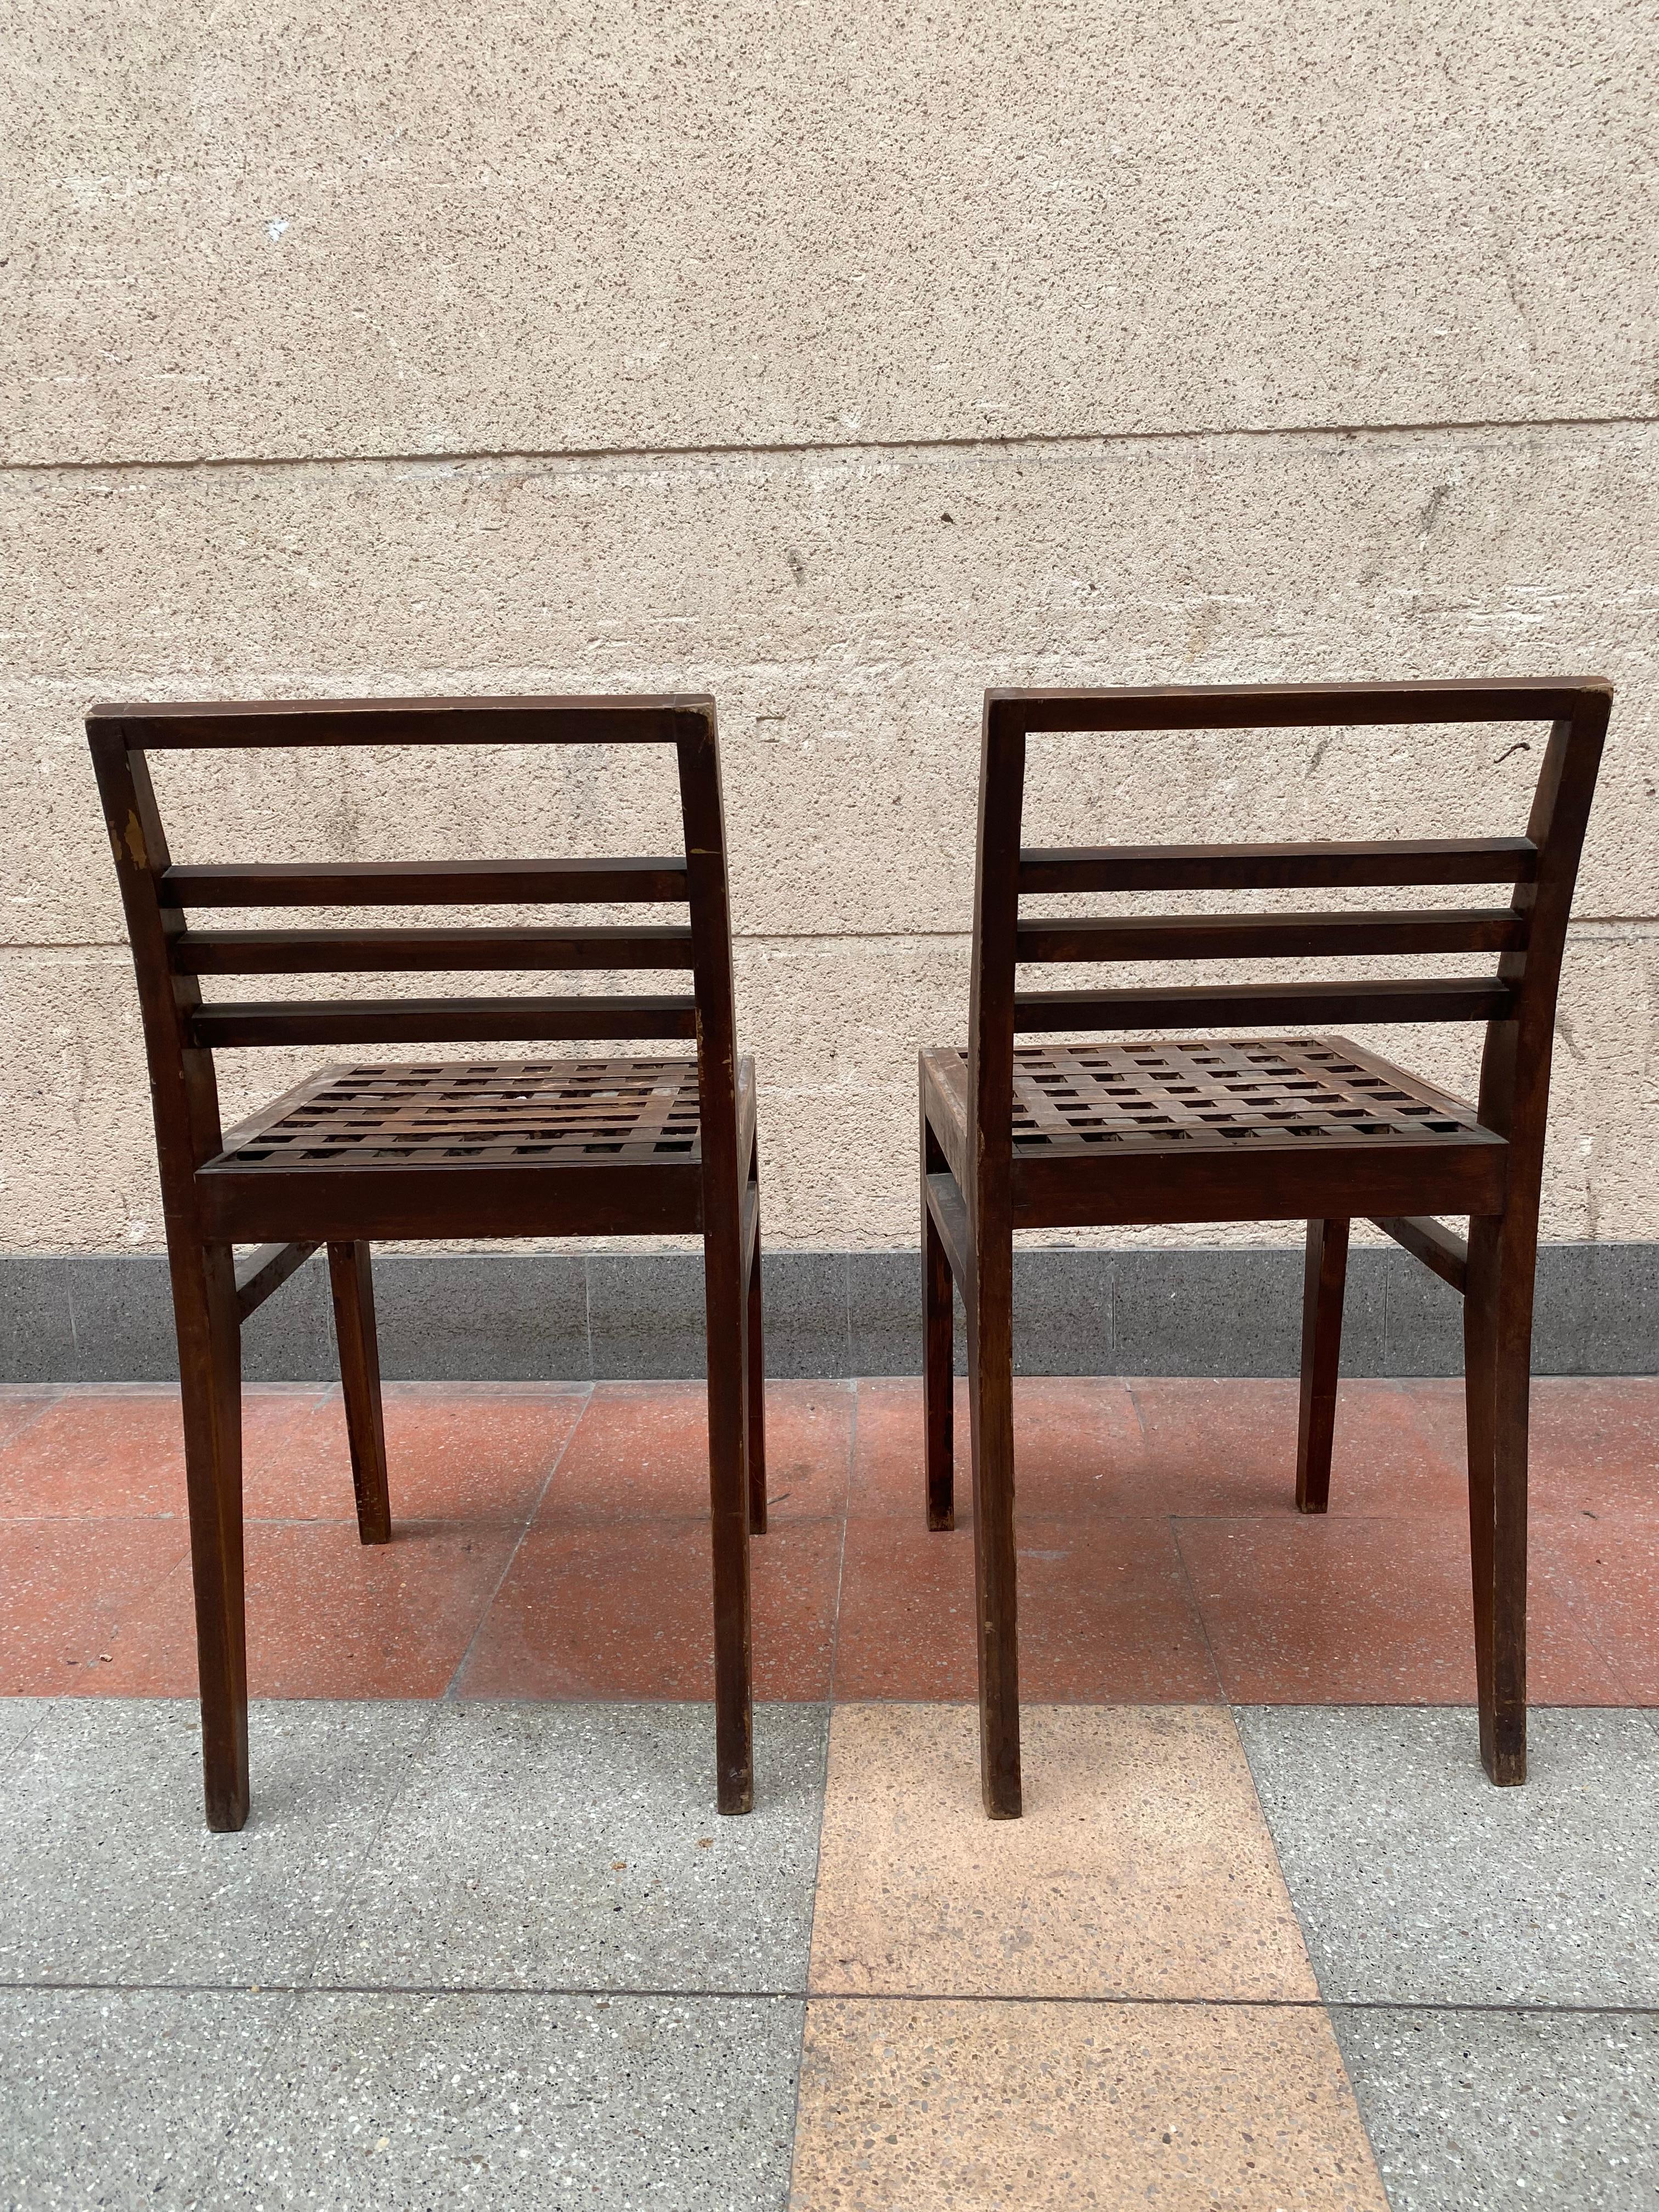 Pair of René Gabriel chairs - Circa 1947/1950
Reconstruction furniture
Developed to furnish homes damaged after the Second World War

Early model by René Gabriel
1st edition
Oak
Very good structure
Patina or wax to redo

H 75 x l 40 x d 39.5 cm

In